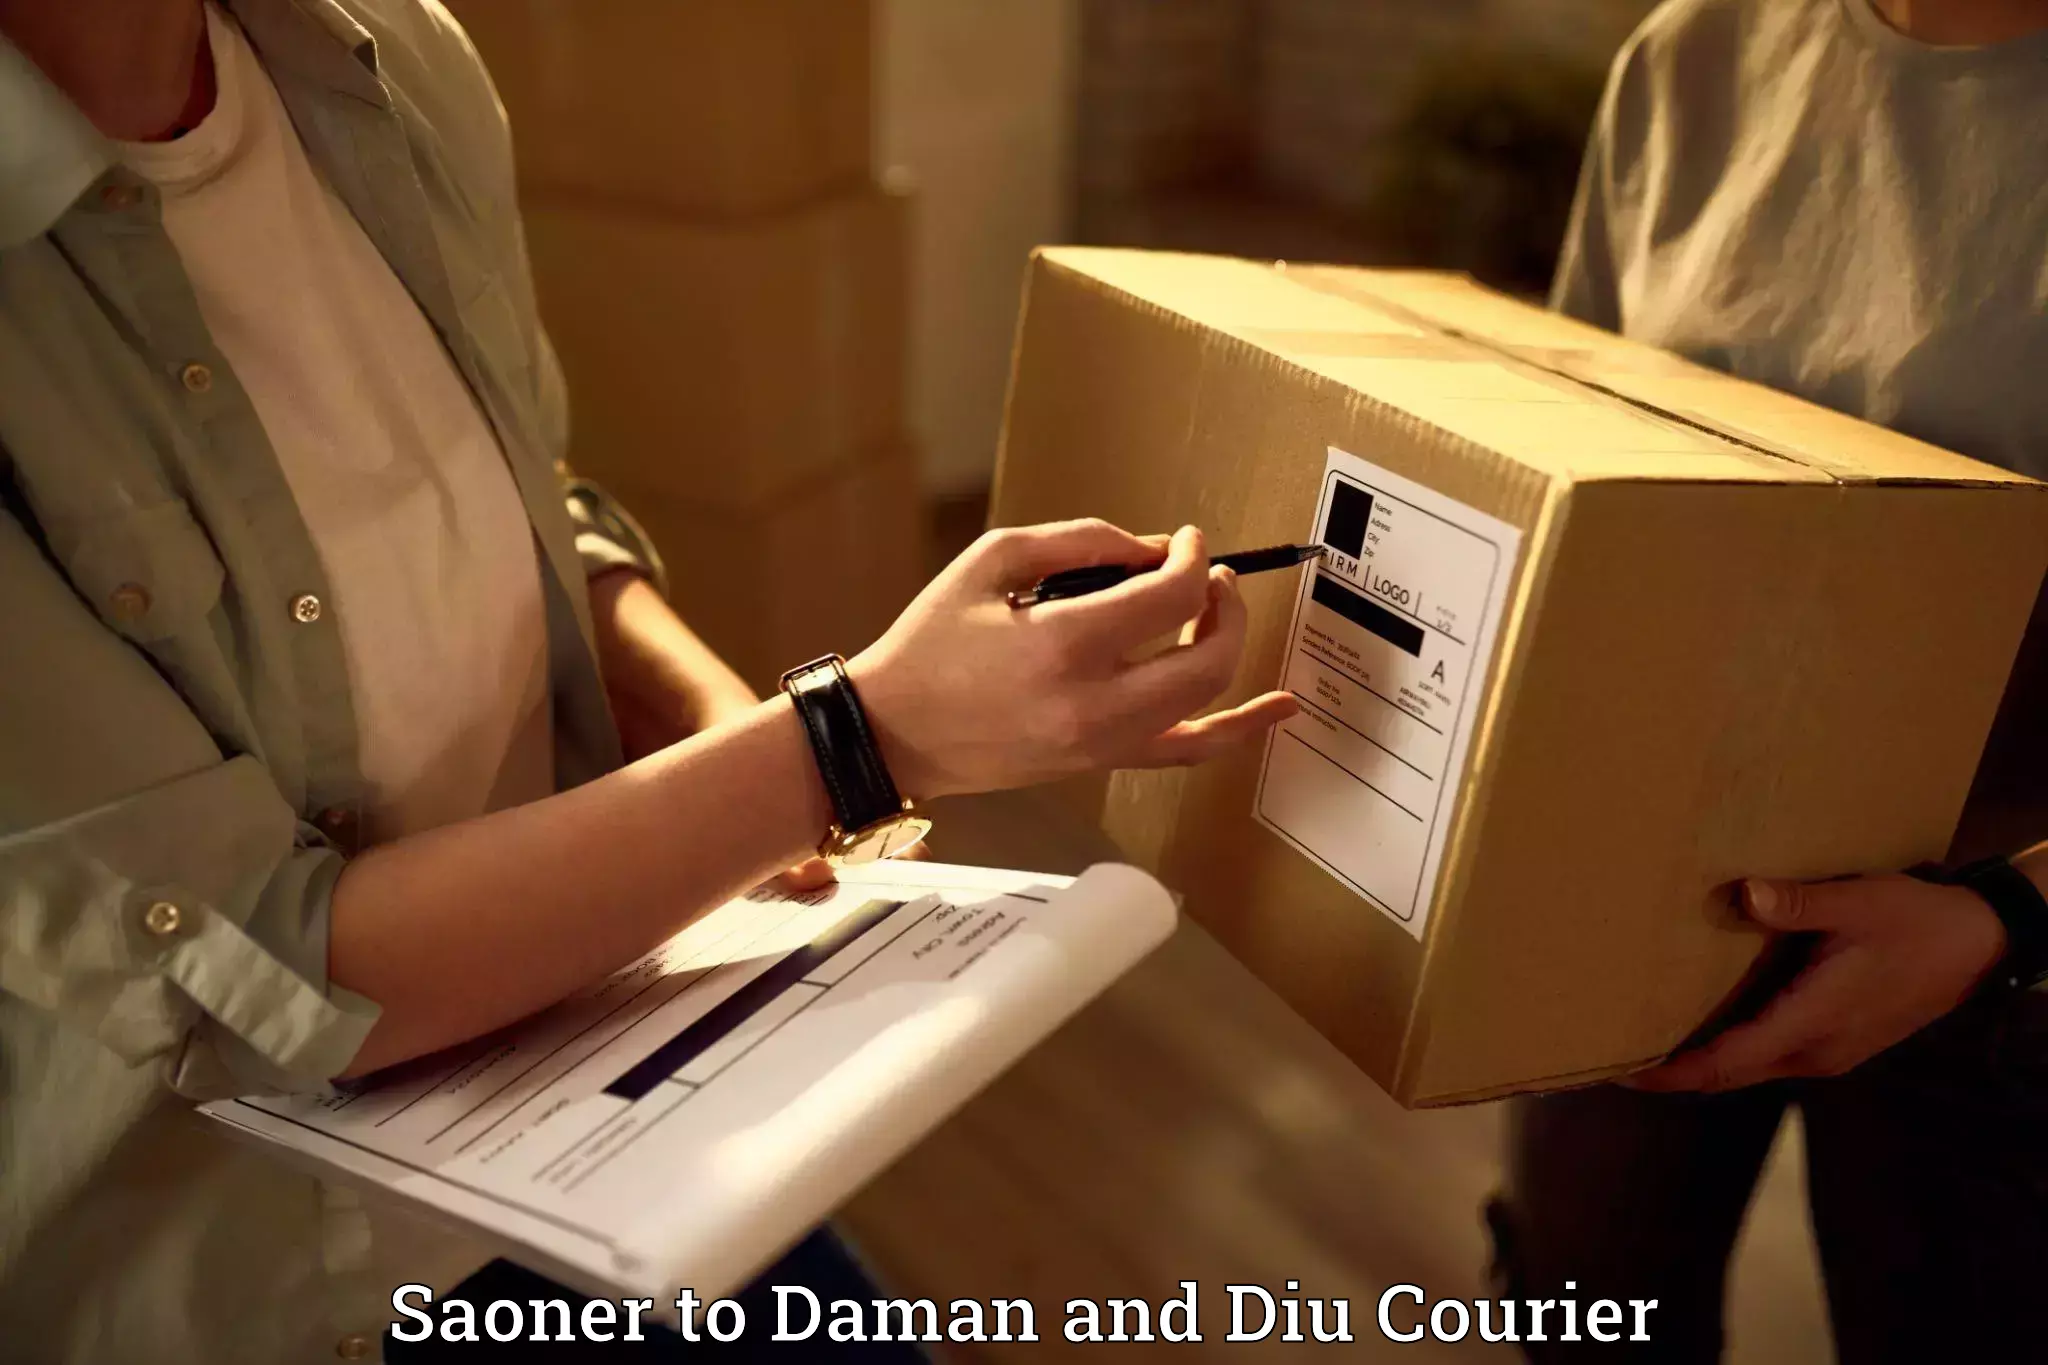 Furniture delivery service Saoner to Daman and Diu